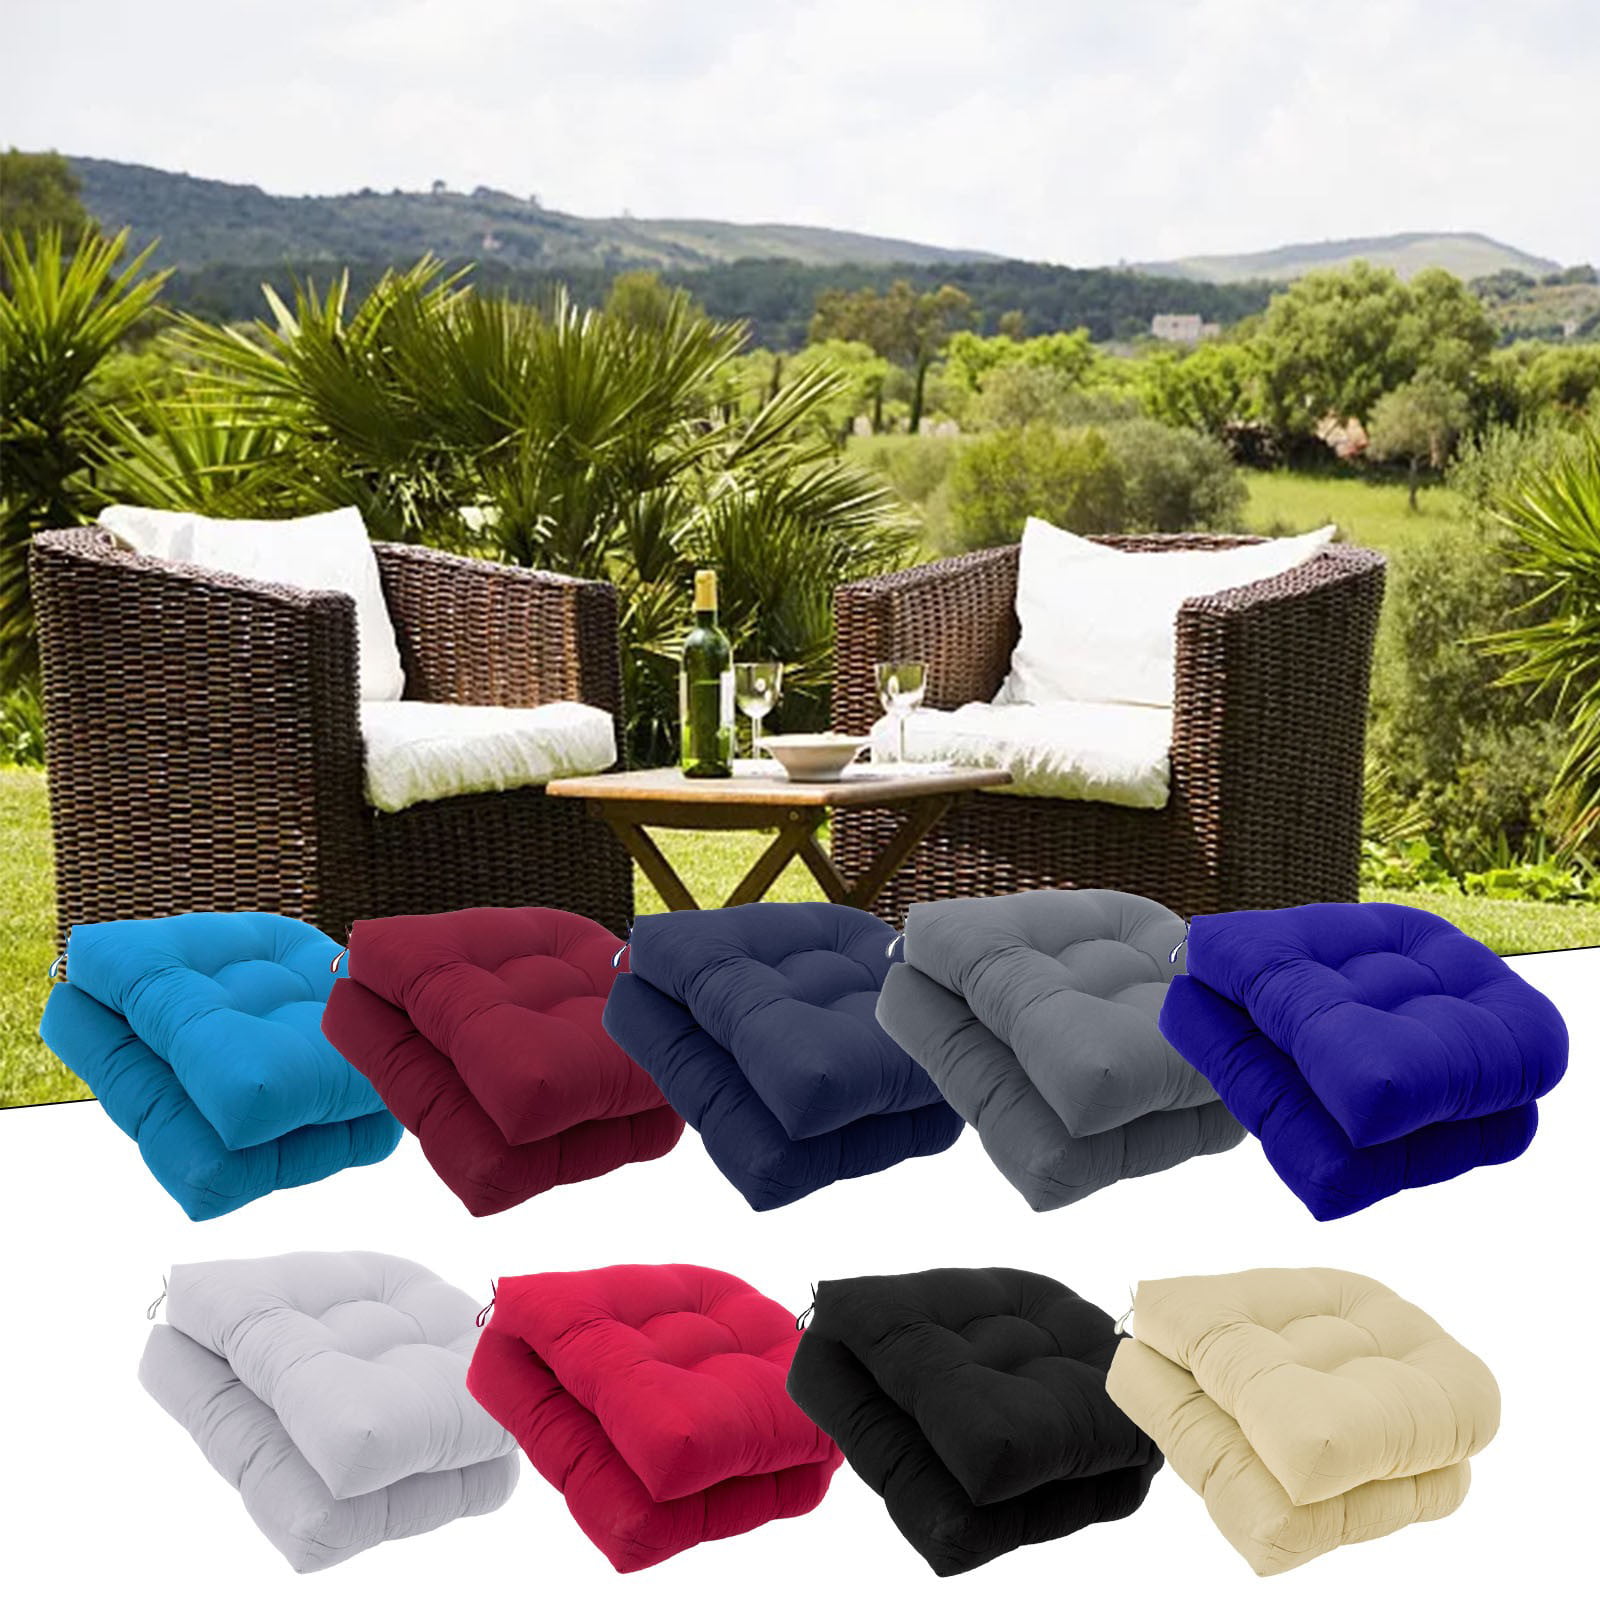  Hemoton Outside Chair cusionshions Outdoor mat Sitting Cushion  seat Cushions for Home Bedroom Cushion Restaurant Cushion Summer mat Chair  Cushion The Bench Grid Student Rattan Summer Items : Baby